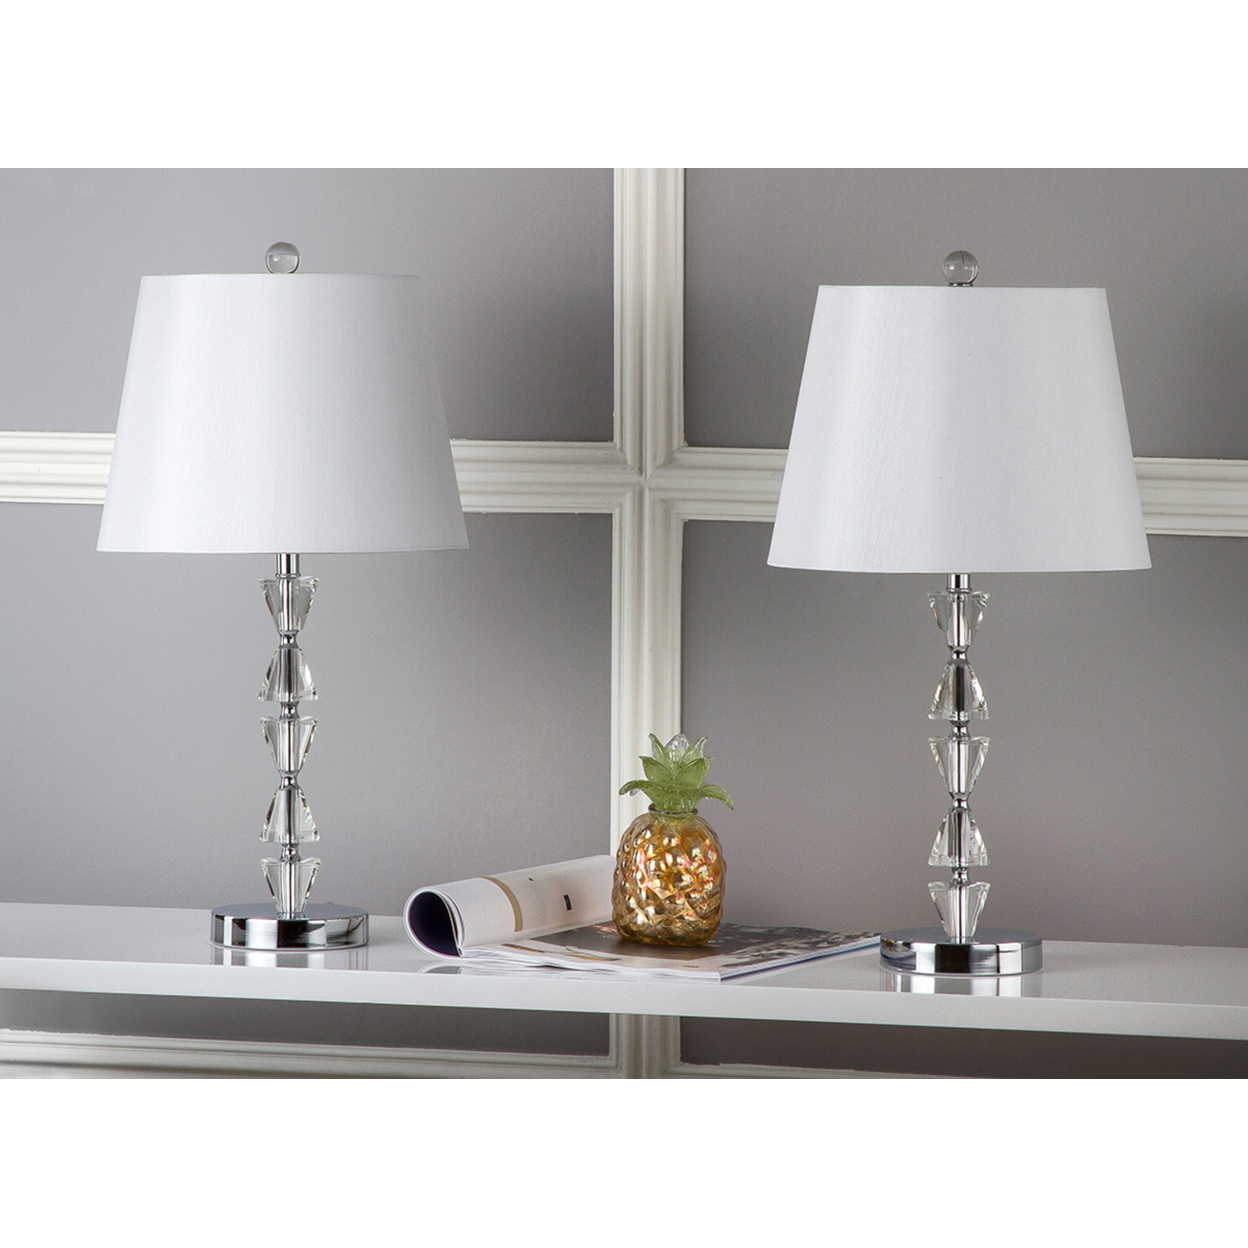 SAFAVIEH Deco Prism Crystal Lamp (Set Of 2) , Clear / White ,